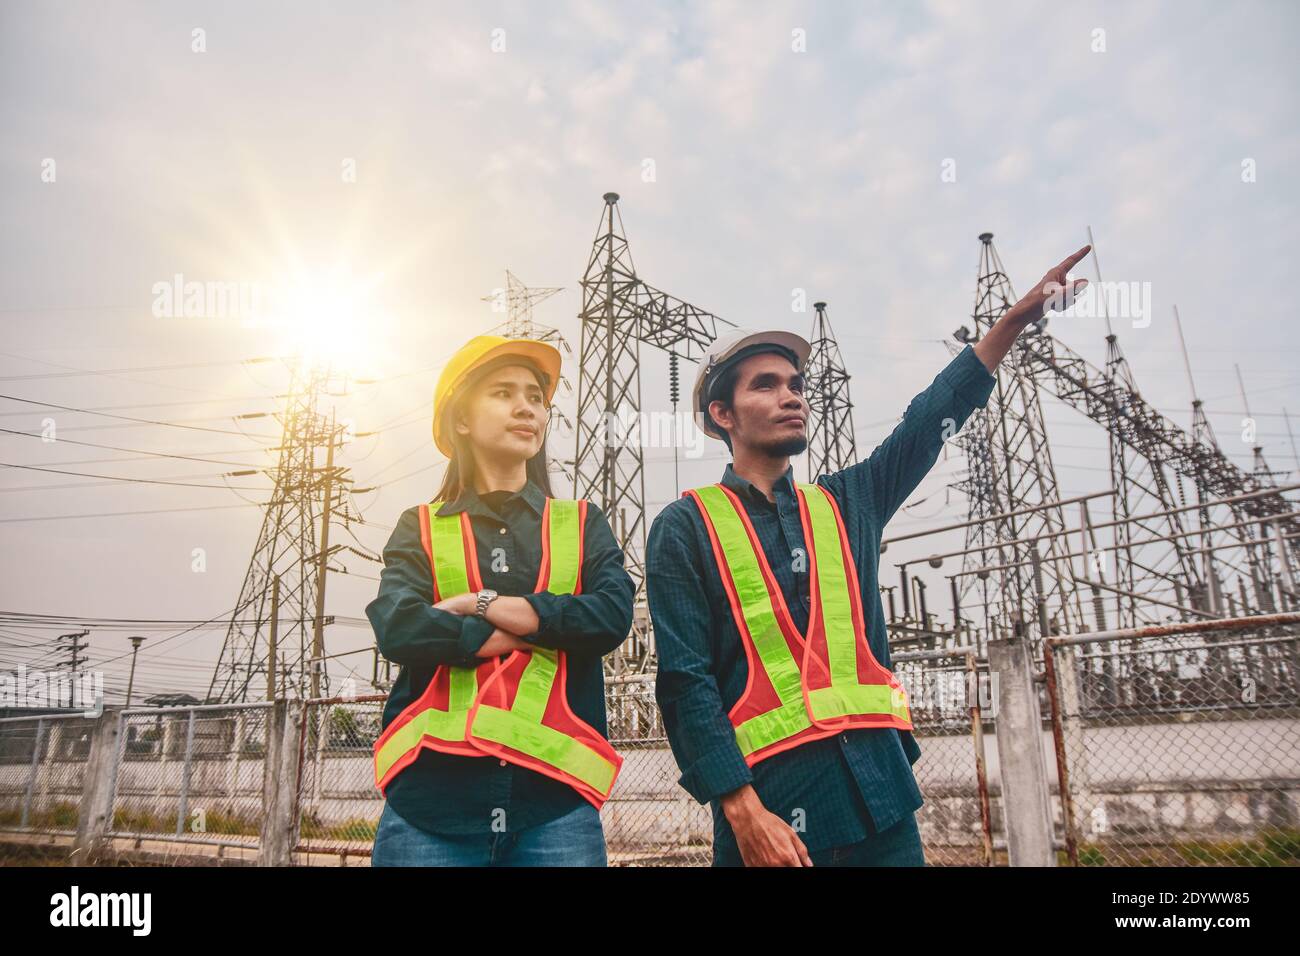 Two Electrician Engineer high voltage tower background Stock Photo